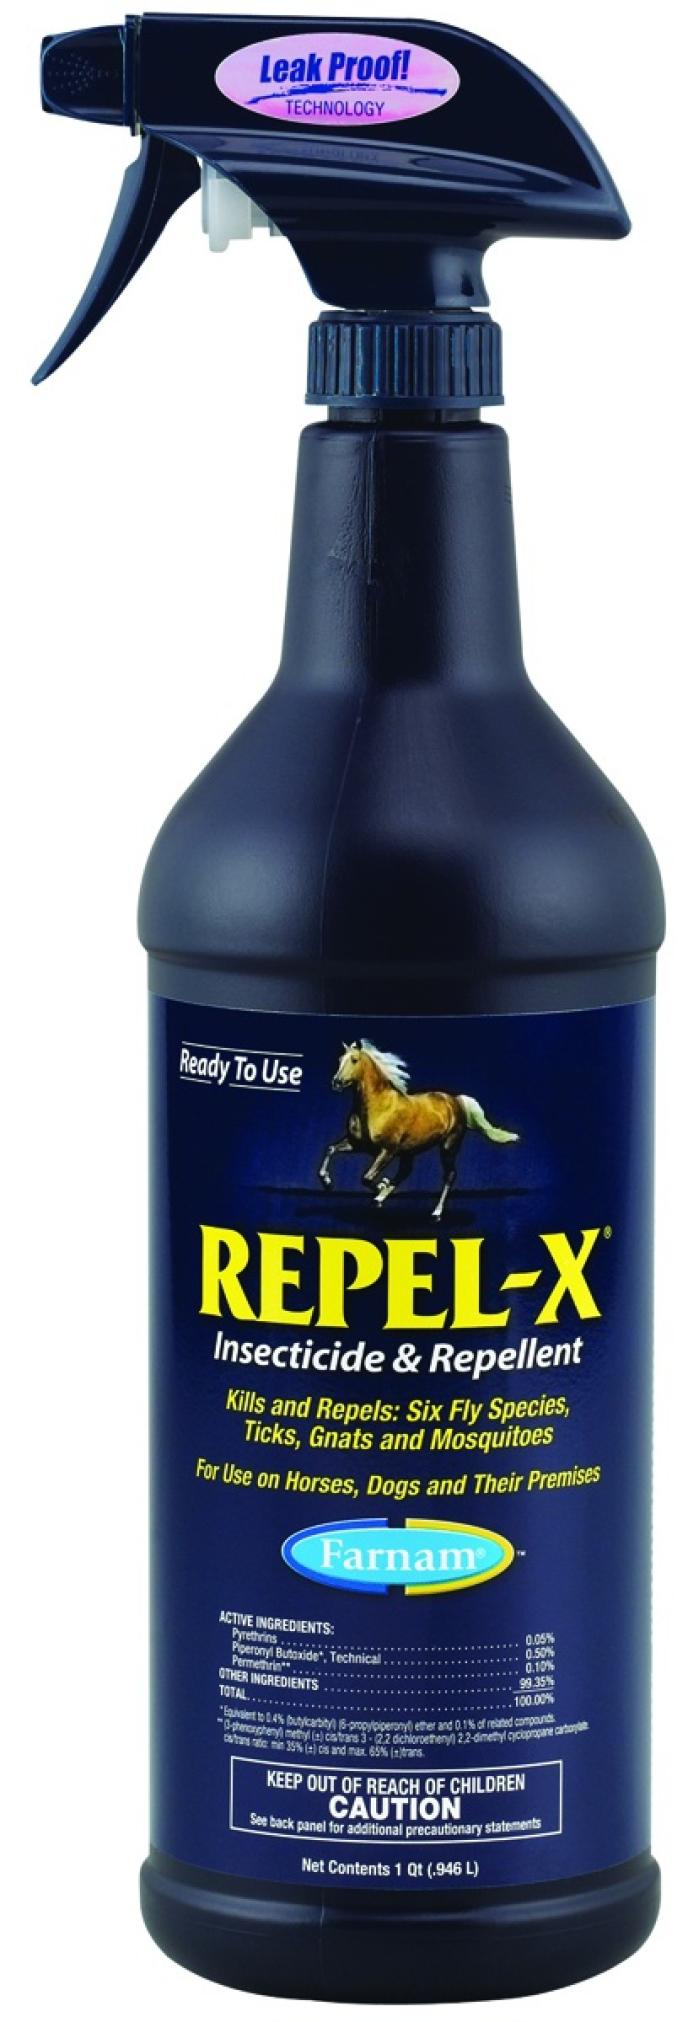 Repel-X Insecticide & Repellent Fly Spray 32 oz